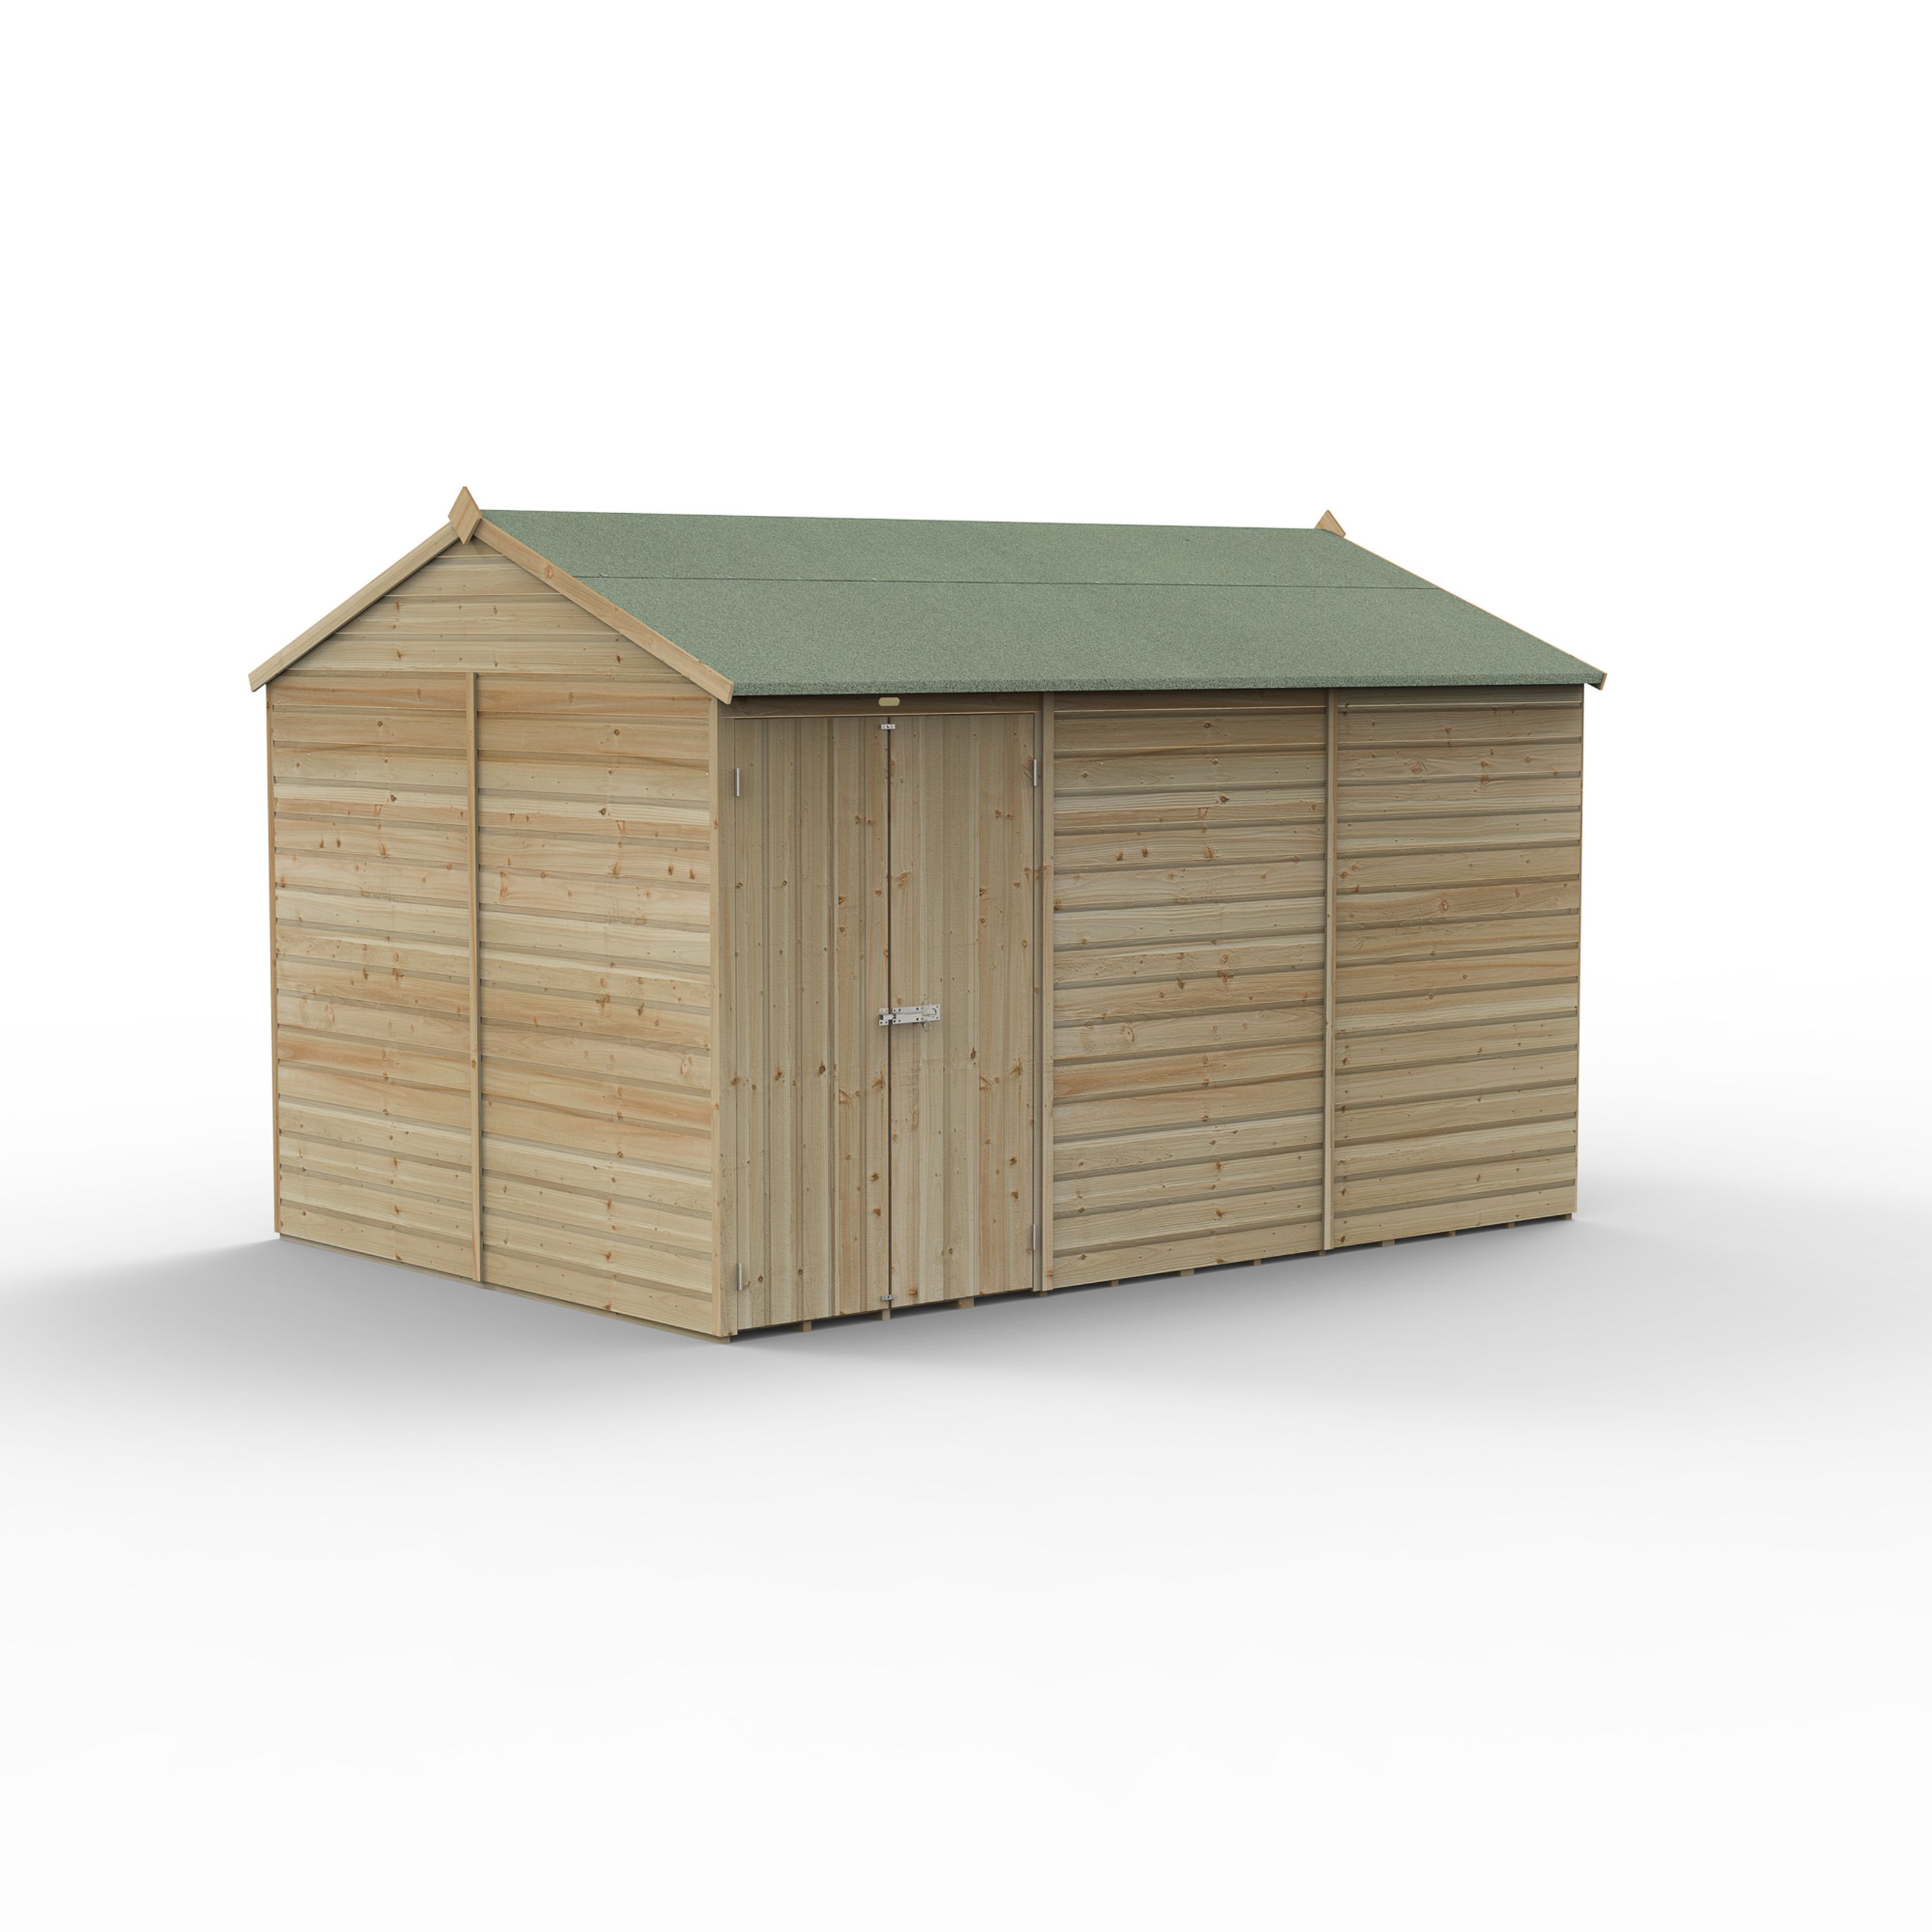 Forest Garden Beckwood 12x8 ft Reverse apex Natural timber Wooden 2 door Shed with floor